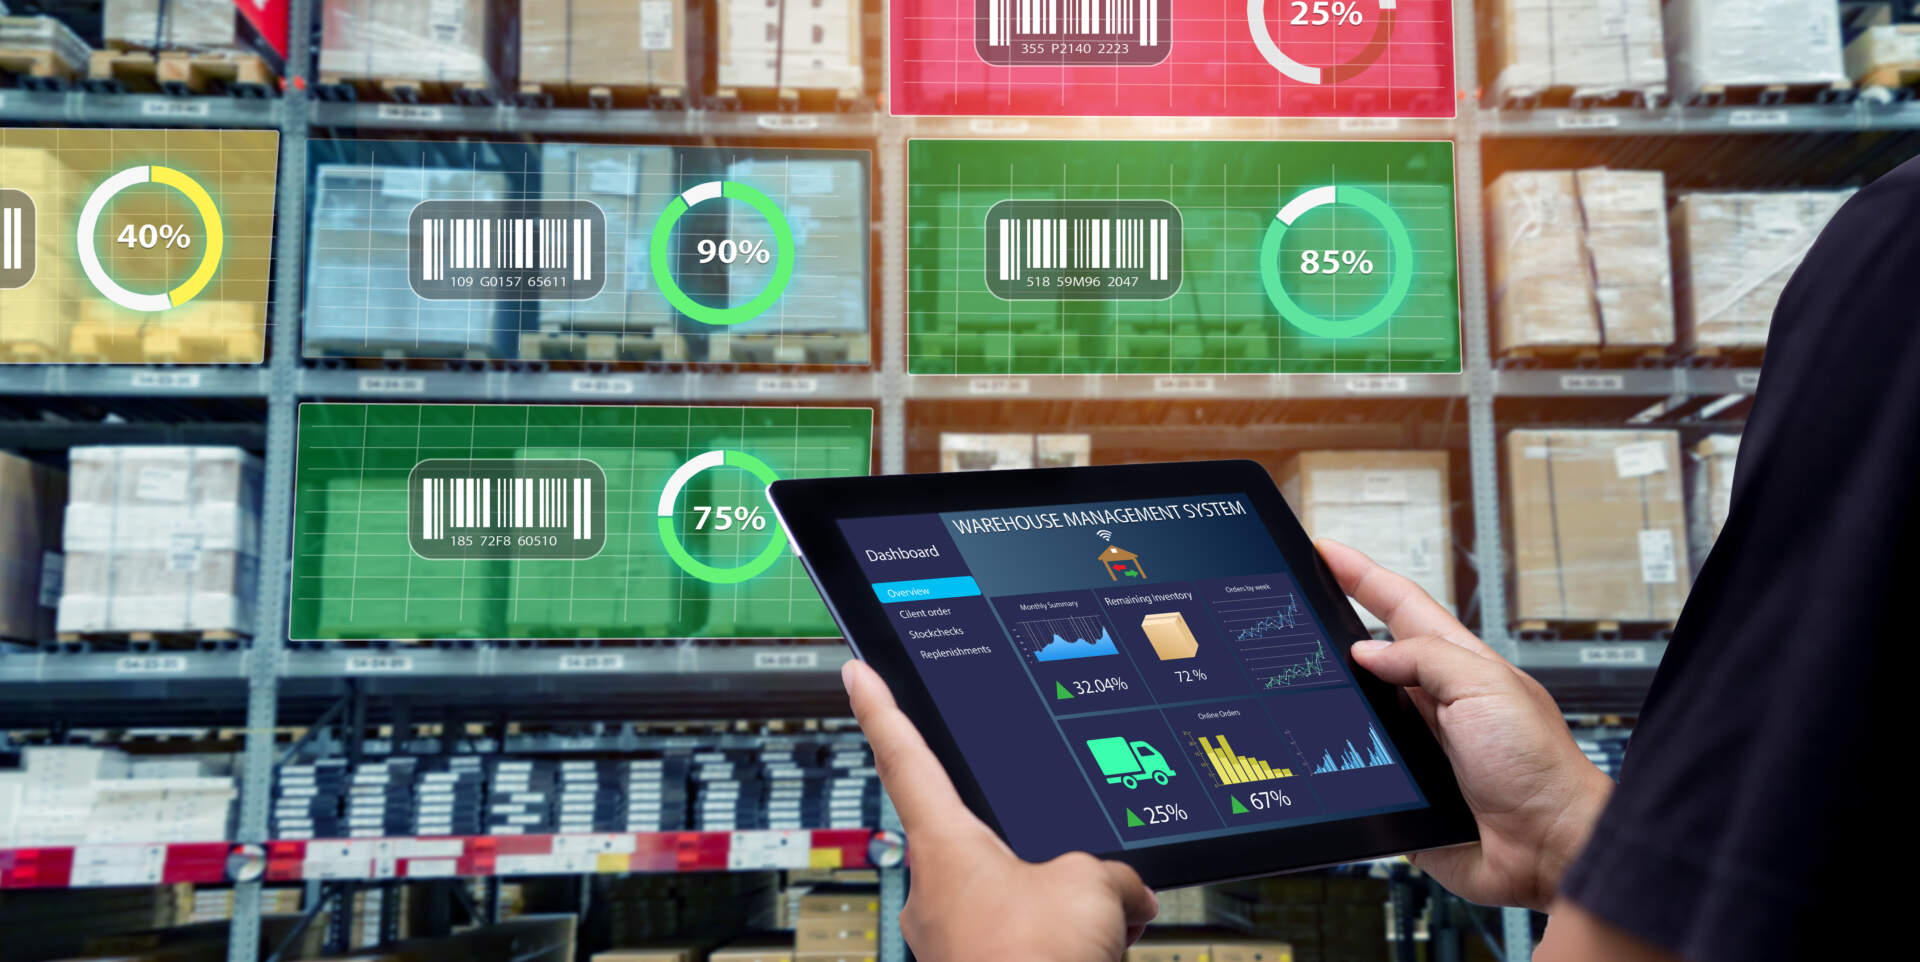 New trends in warehouse management puts data, convenience, and, ultimately, control in the hands of the customer. Find out what to look for.